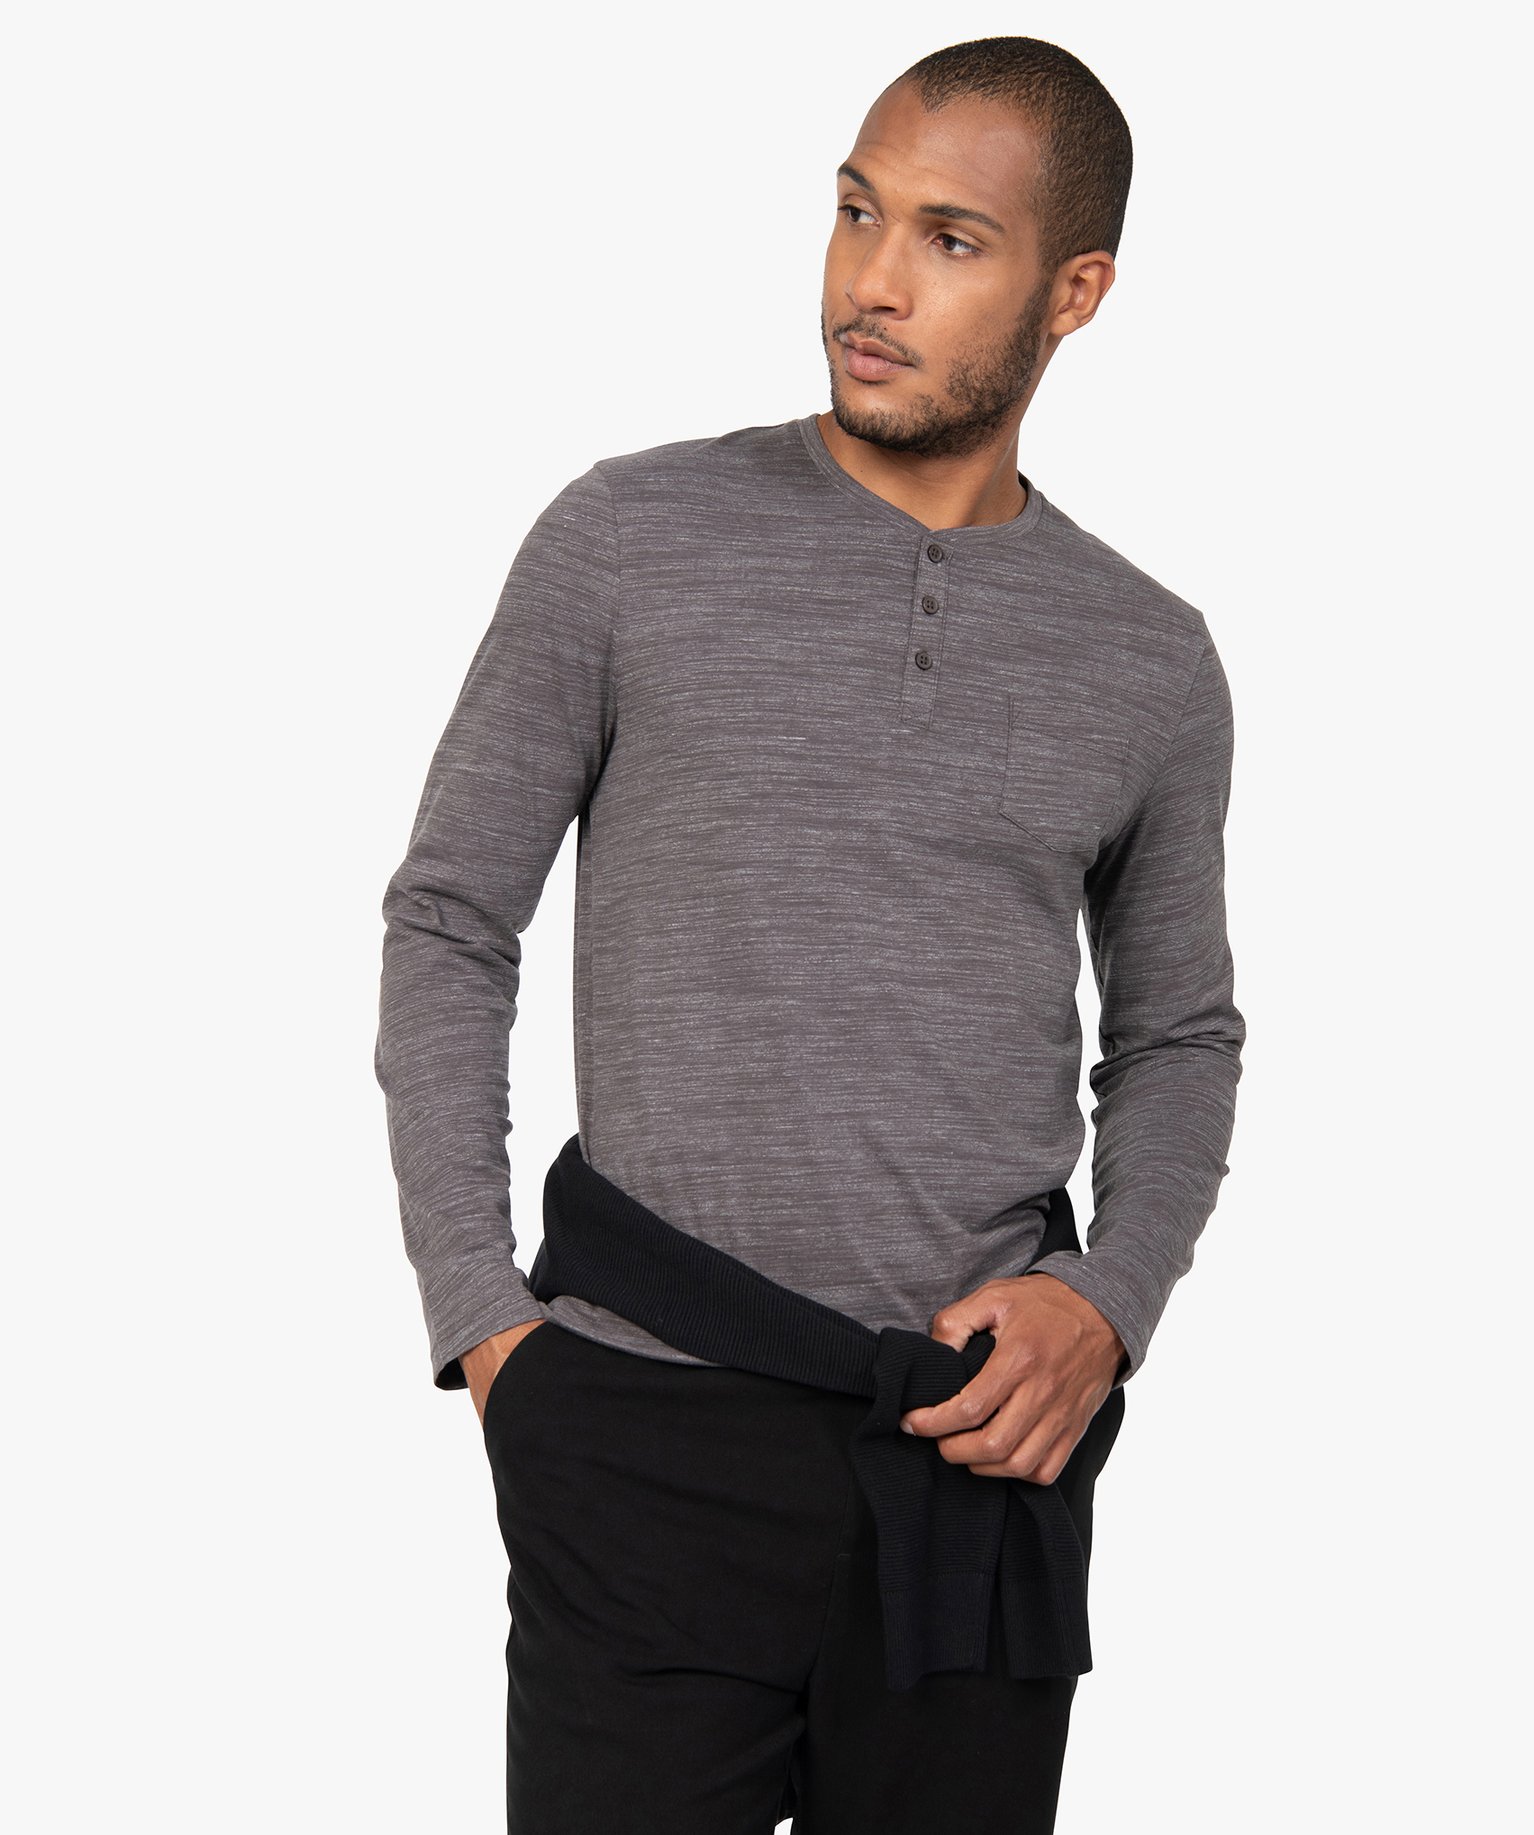 tee-shirt homme a manches longues et col tunisien gris tee-shirts